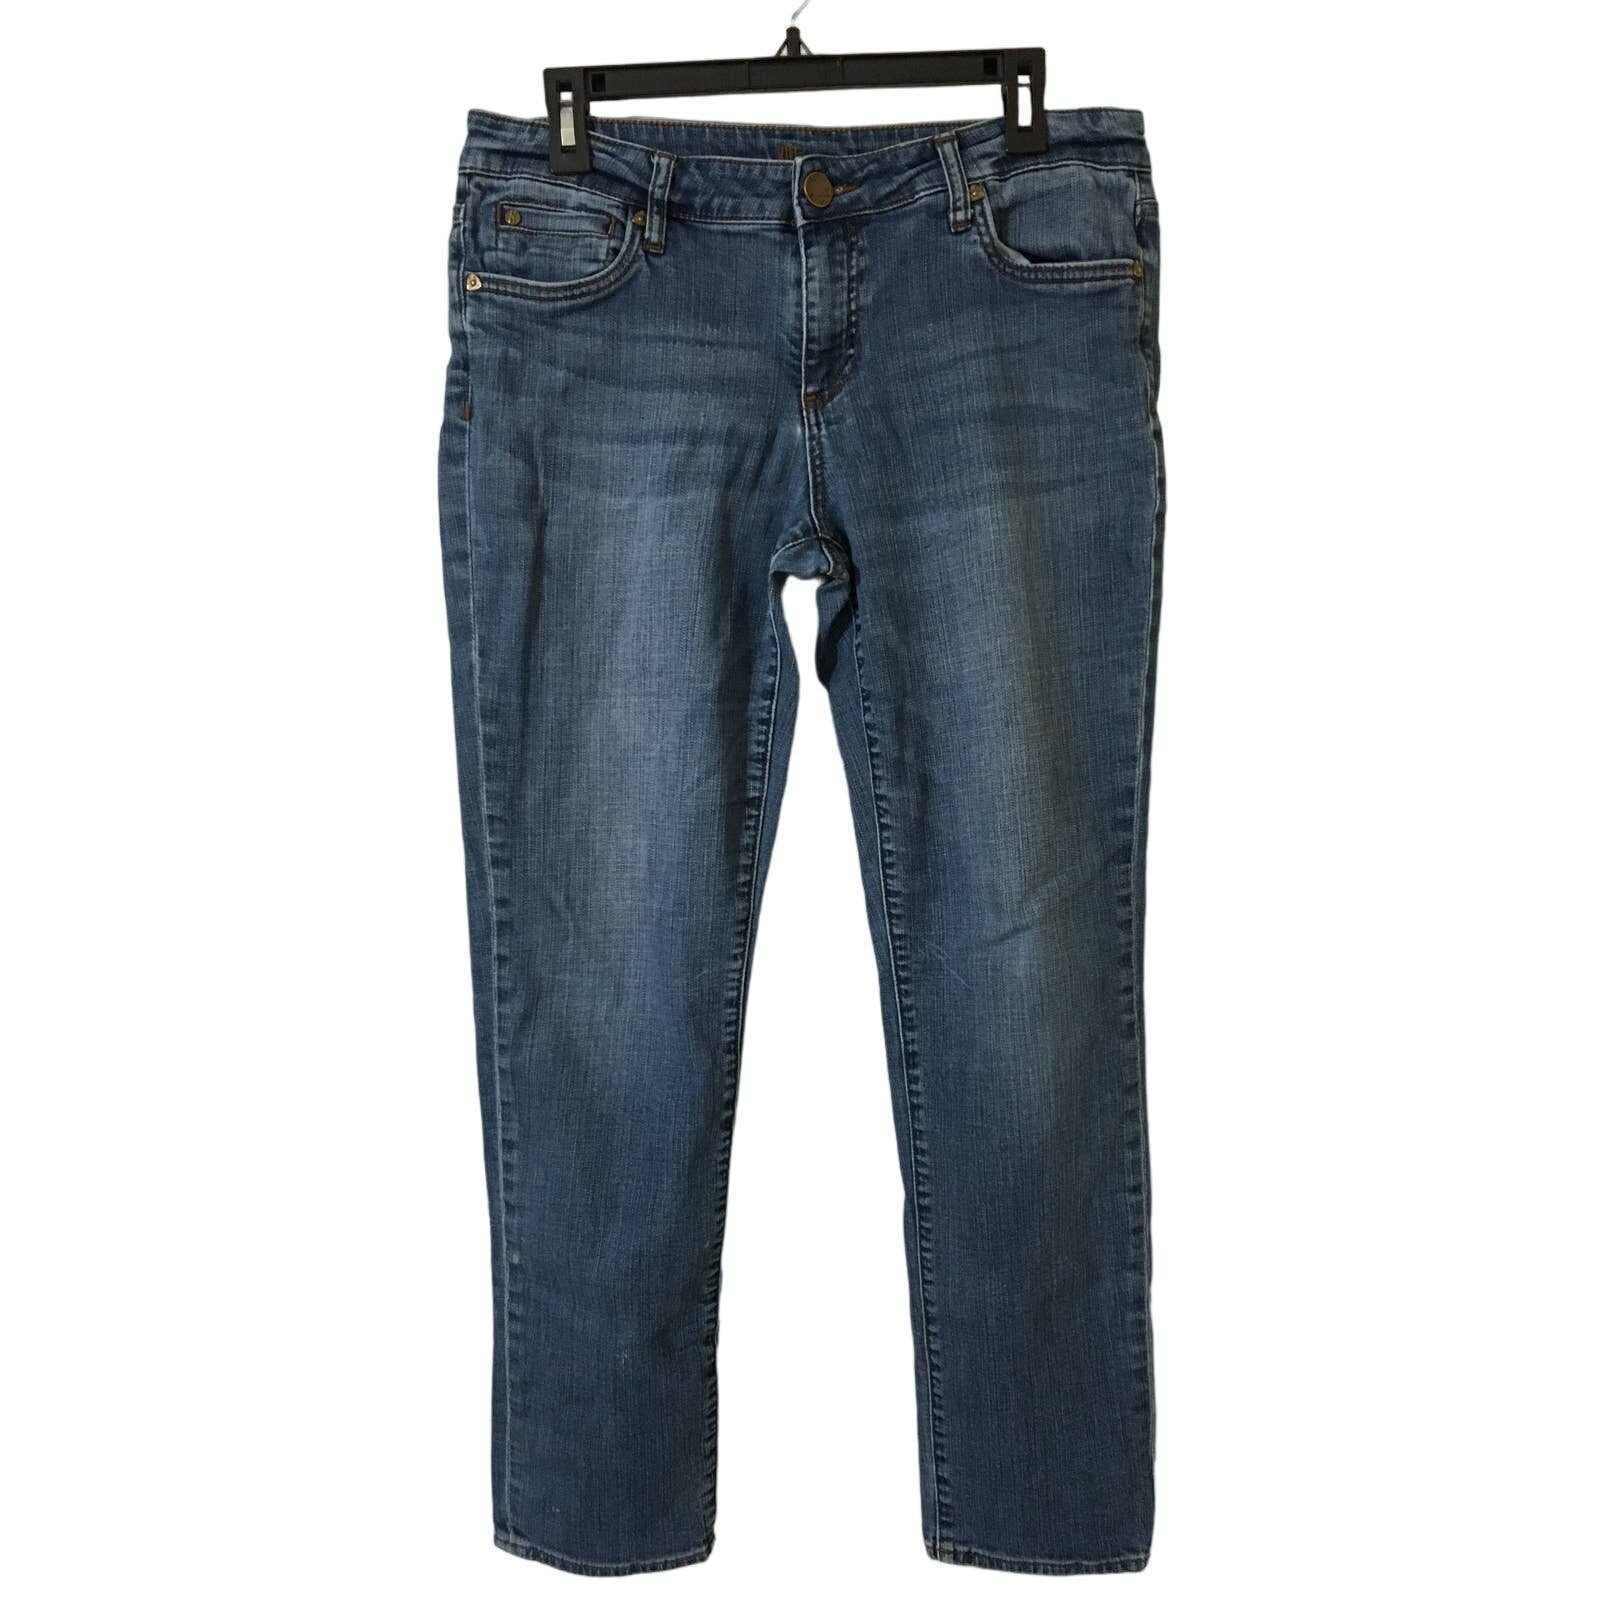 Classic KUT from the Kloth Size 10 Straight Leg Jeans Minor Flaws g21WLvKSI Counter Genuine 